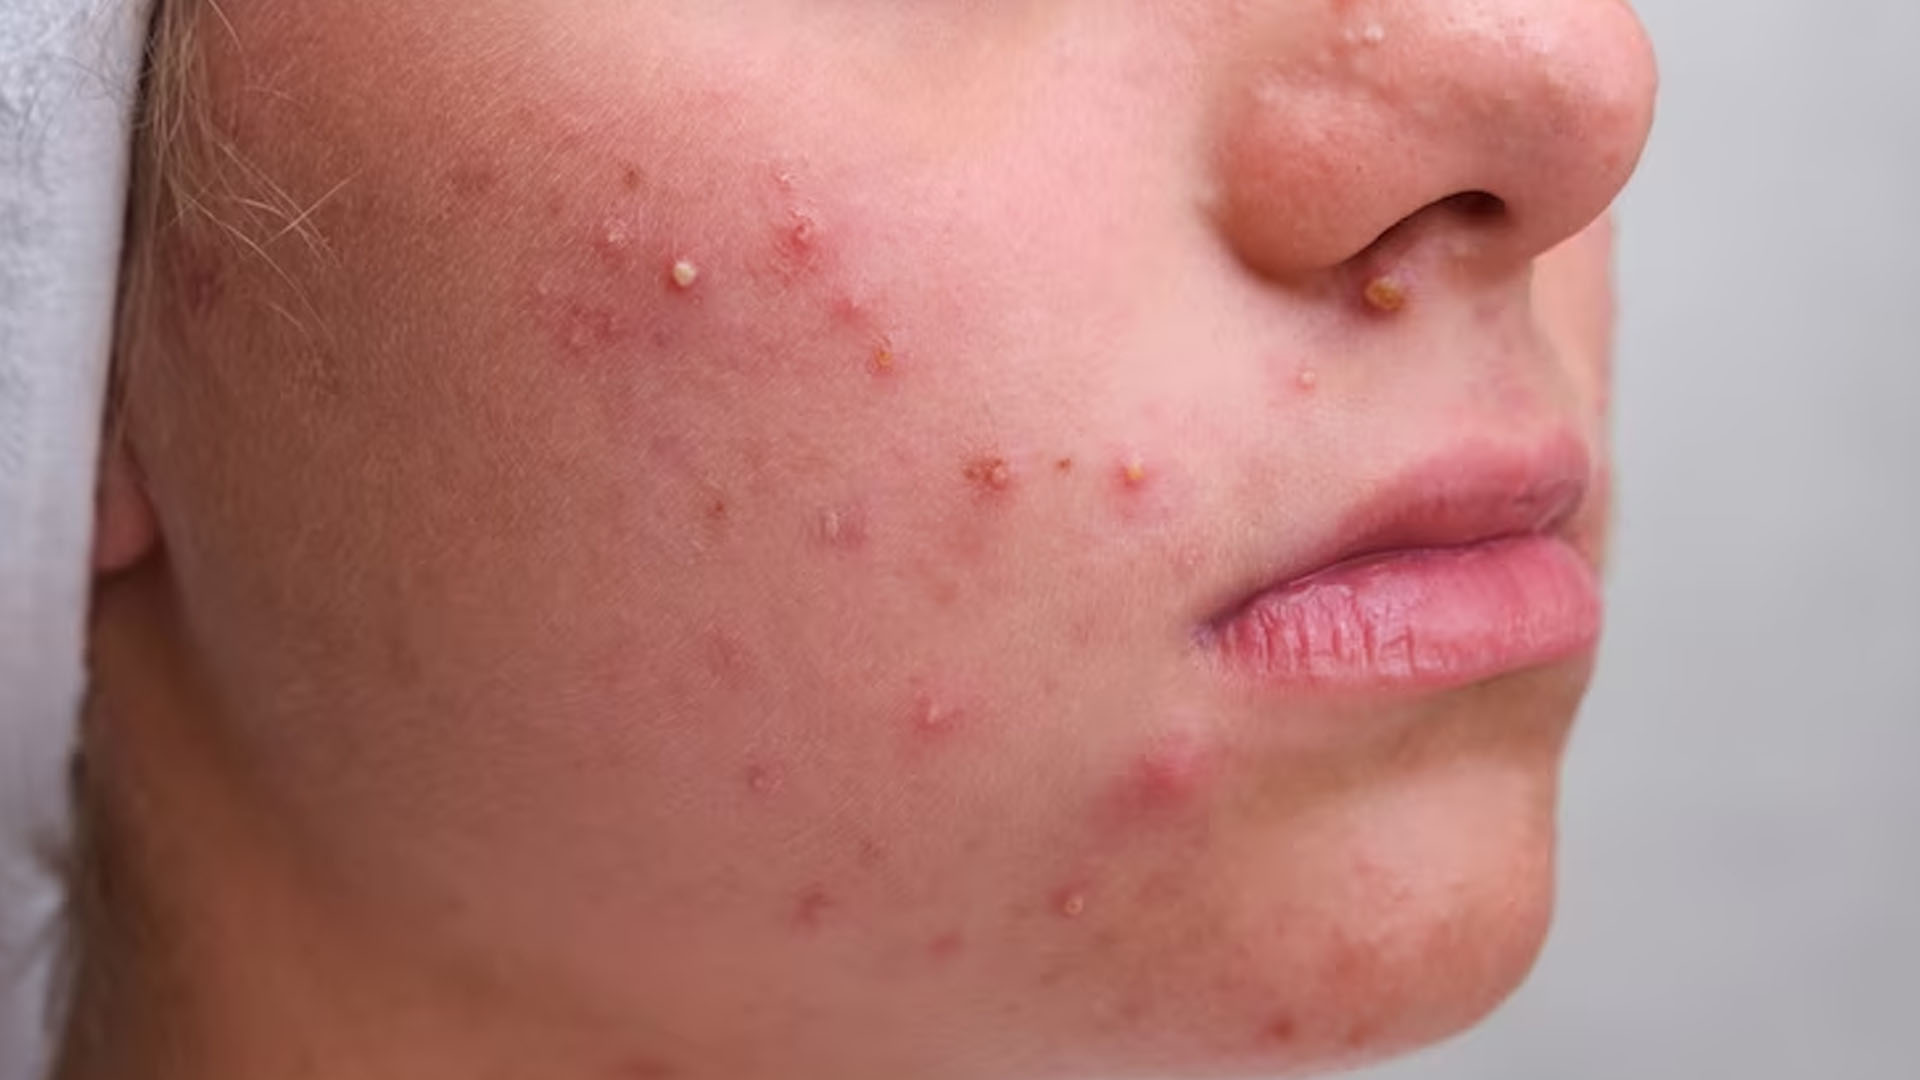 What are the Home Remedies for Fungal Acne?